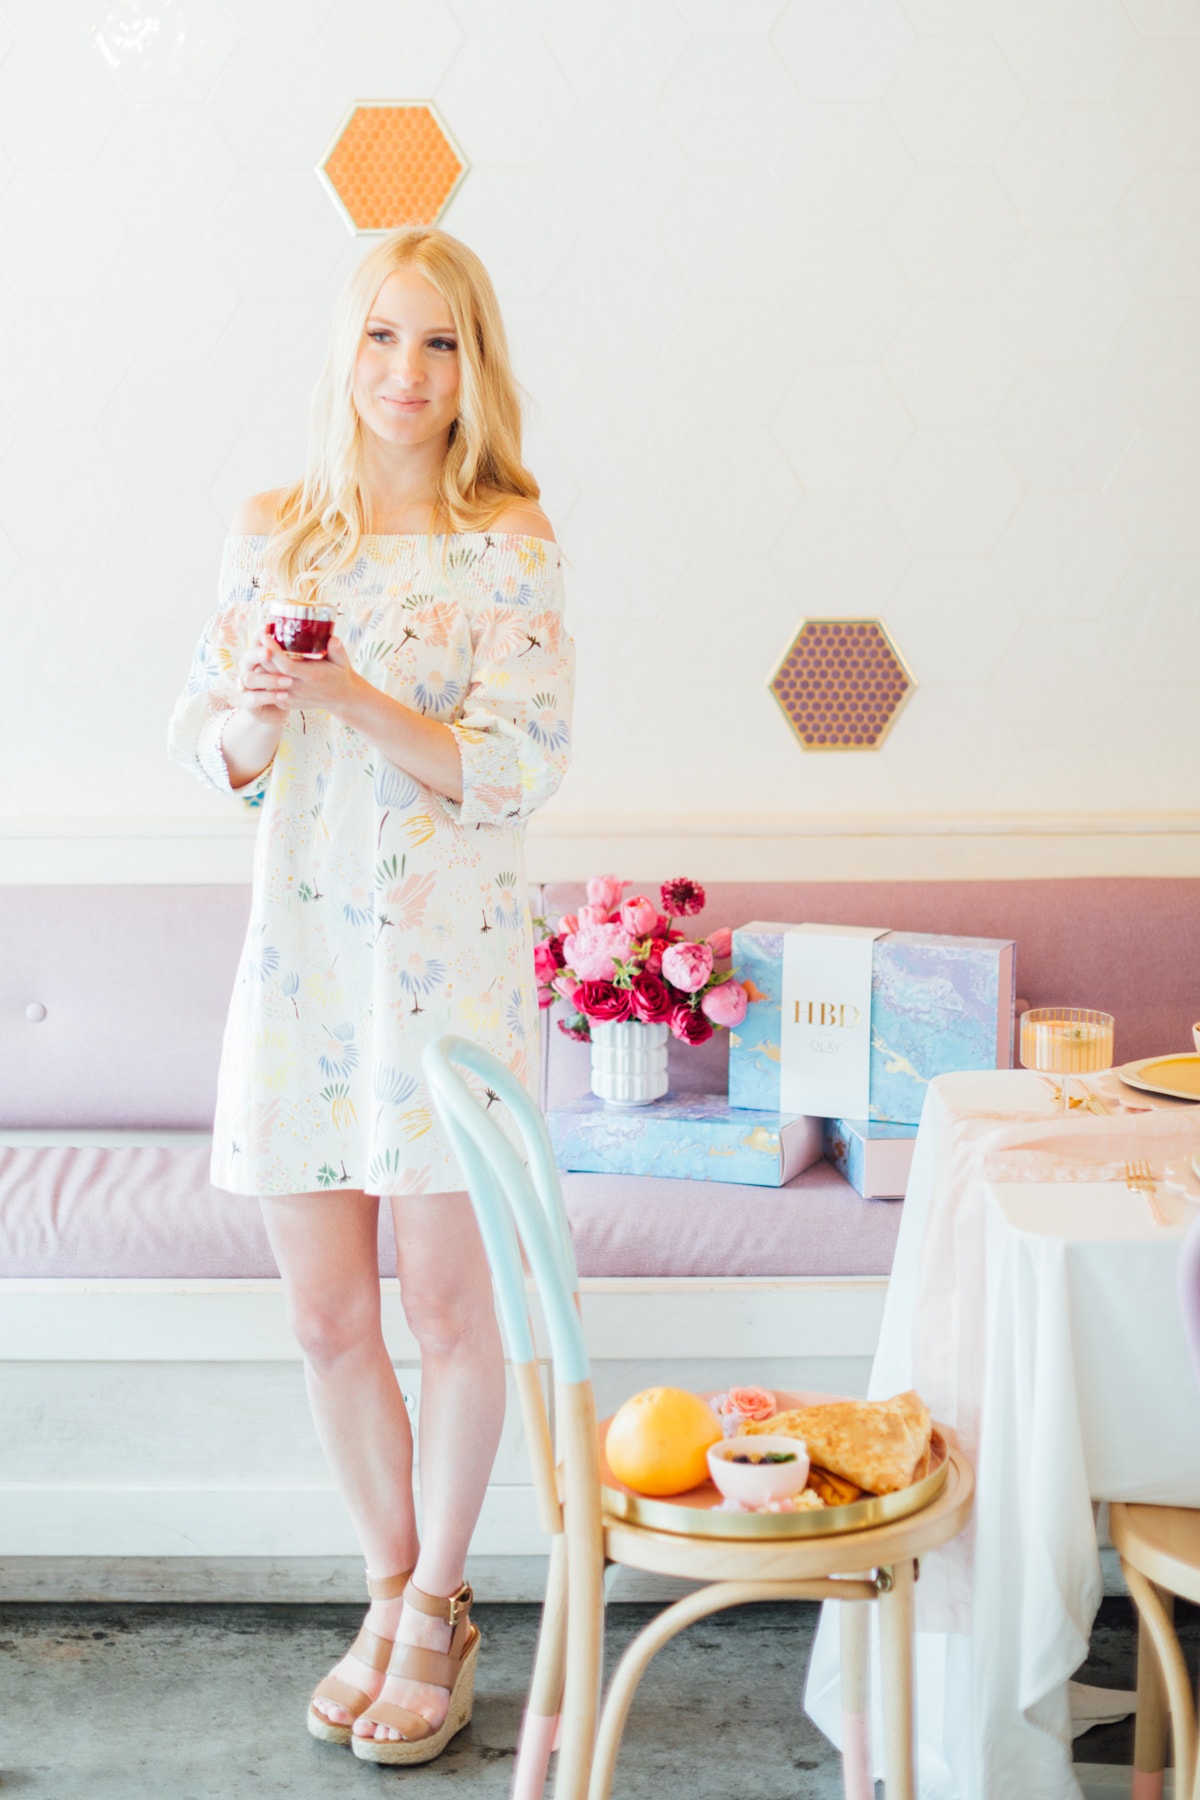 Spring brunch ready - A Perfectly Pastel Easter Table Idea by top Houston lifestyle blogger Ashley Rose of Sugar & Cloth #diy #tablescape #ideas #easter #pastel #party #decorations #brunch #bridalshower #bridal #shower #baby